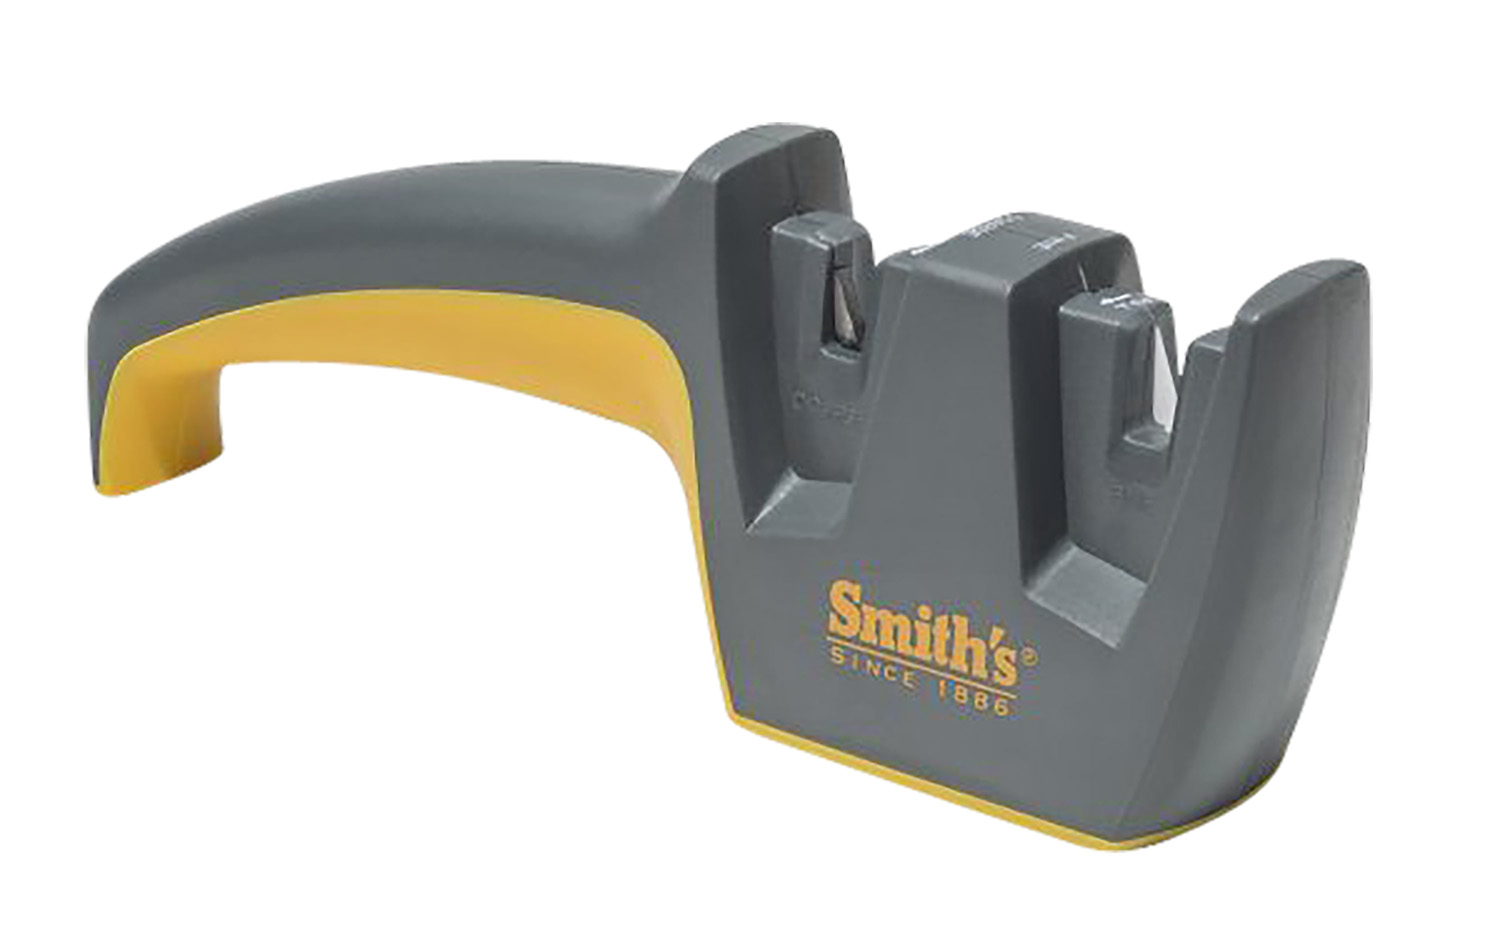 https://op2.0ps.us/original/opplanet-smiths-products-50348-gray-yellow-m